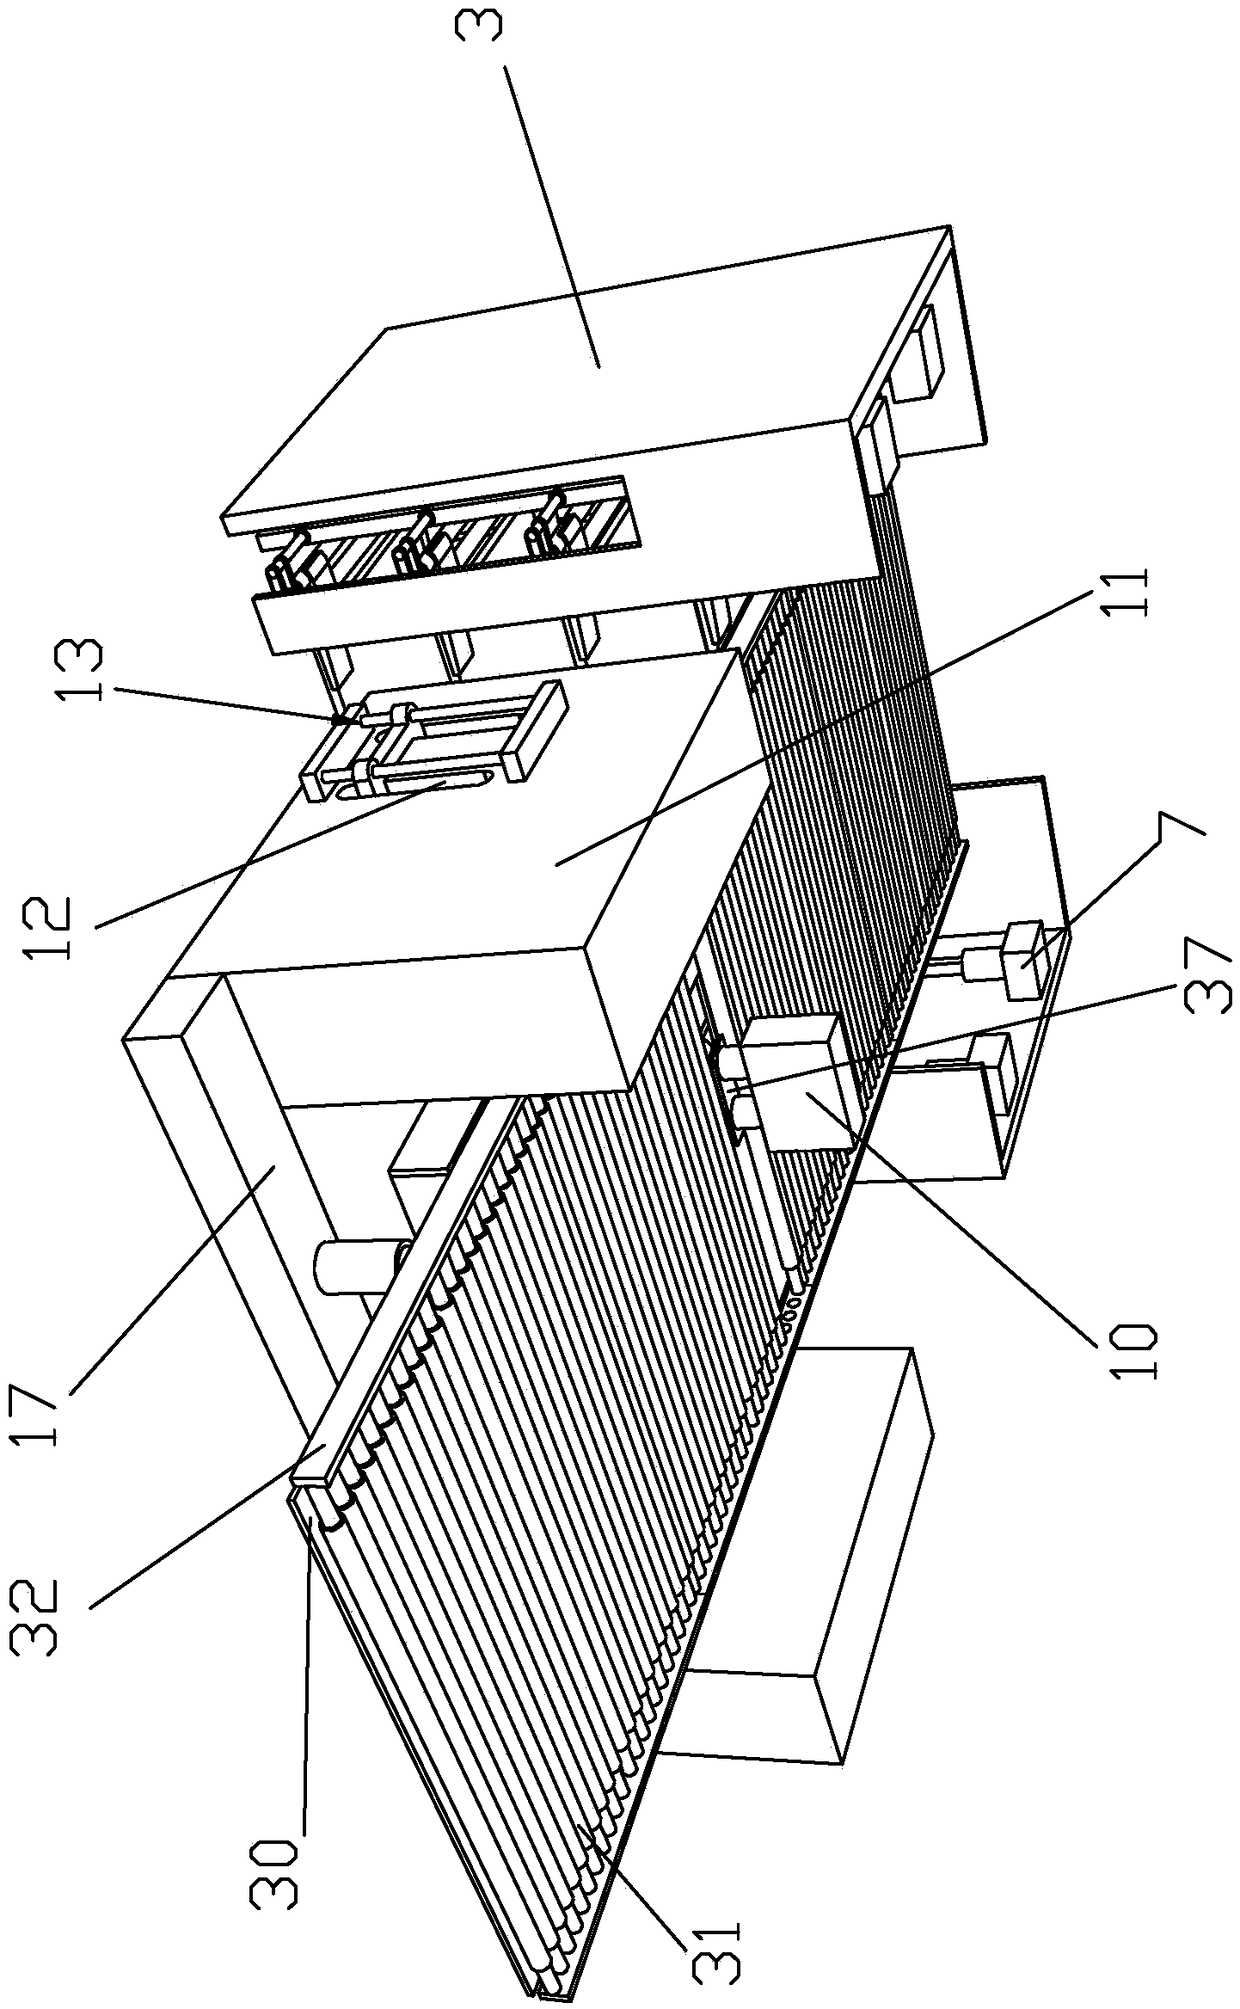 Nailing device for paperboard production